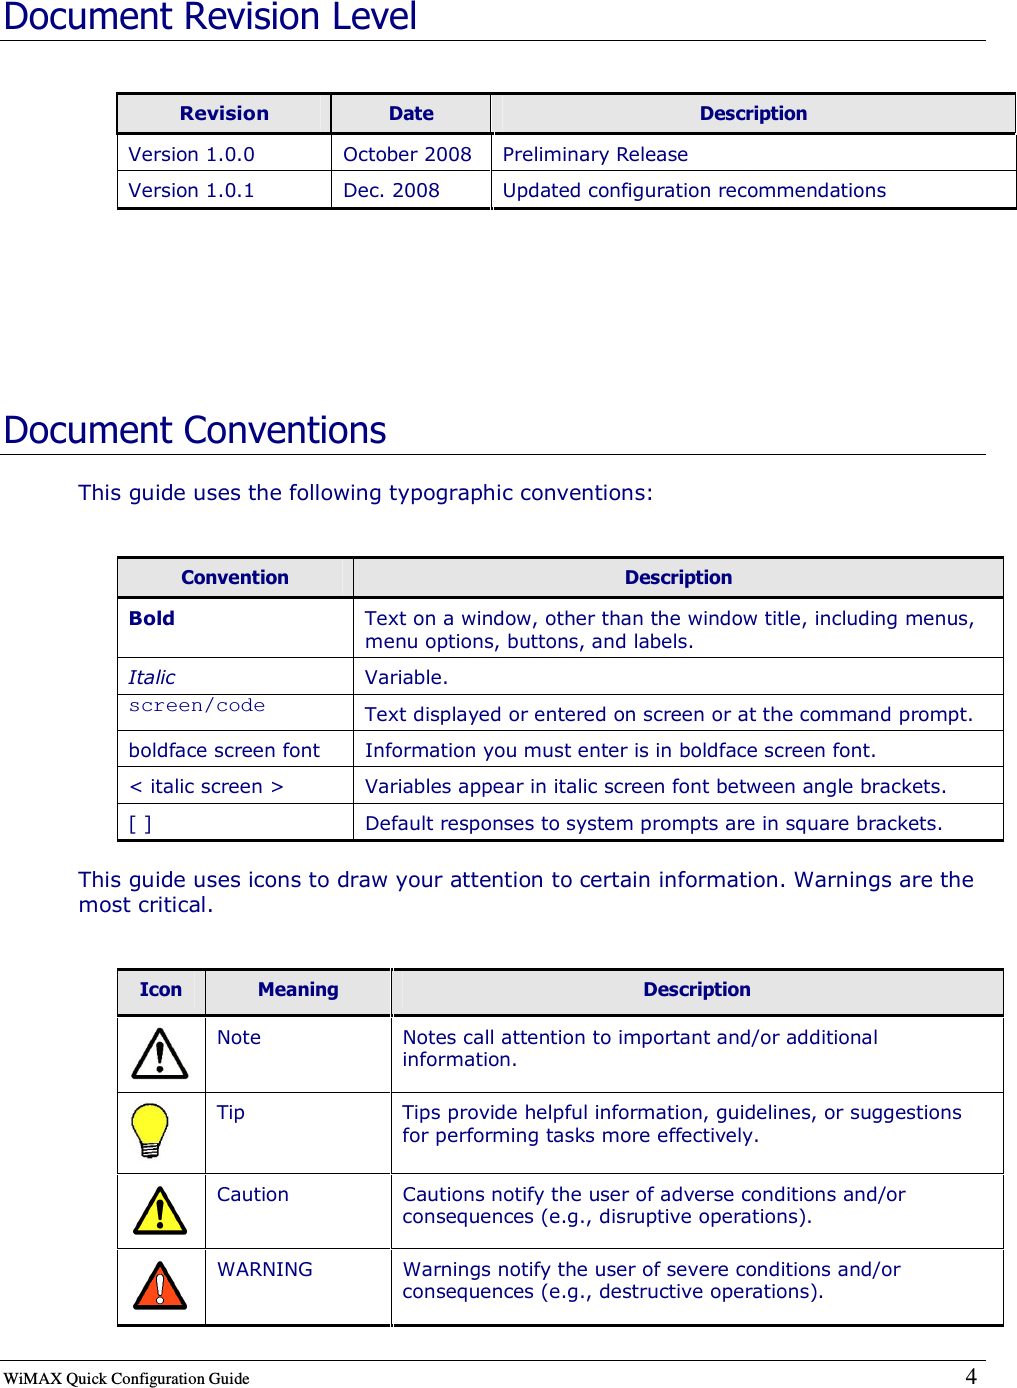  WiMAX Quick Configuration Guide   4    Document Revision Level  Revision  Date  Description Version 1.0.0  October 2008  Preliminary Release Version 1.0.1  Dec. 2008  Updated configuration recommendations   Document Conventions This guide uses the following typographic conventions:  Convention  Description Bold  Text on a window, other than the window title, including menus, menu options, buttons, and labels. Italic  Variable. screen/code  Text displayed or entered on screen or at the command prompt. boldface screen font  Information you must enter is in boldface screen font. &lt; italic screen &gt;  Variables appear in italic screen font between angle brackets. [ ]  Default responses to system prompts are in square brackets. This guide uses icons to draw your attention to certain information. Warnings are the most critical.  Icon  Meaning  Description  Note  Notes call attention to important and/or additional information.  Tip  Tips provide helpful information, guidelines, or suggestions for performing tasks more effectively.  Caution  Cautions notify the user of adverse conditions and/or consequences (e.g., disruptive operations).  WARNING  Warnings notify the user of severe conditions and/or consequences (e.g., destructive operations). 